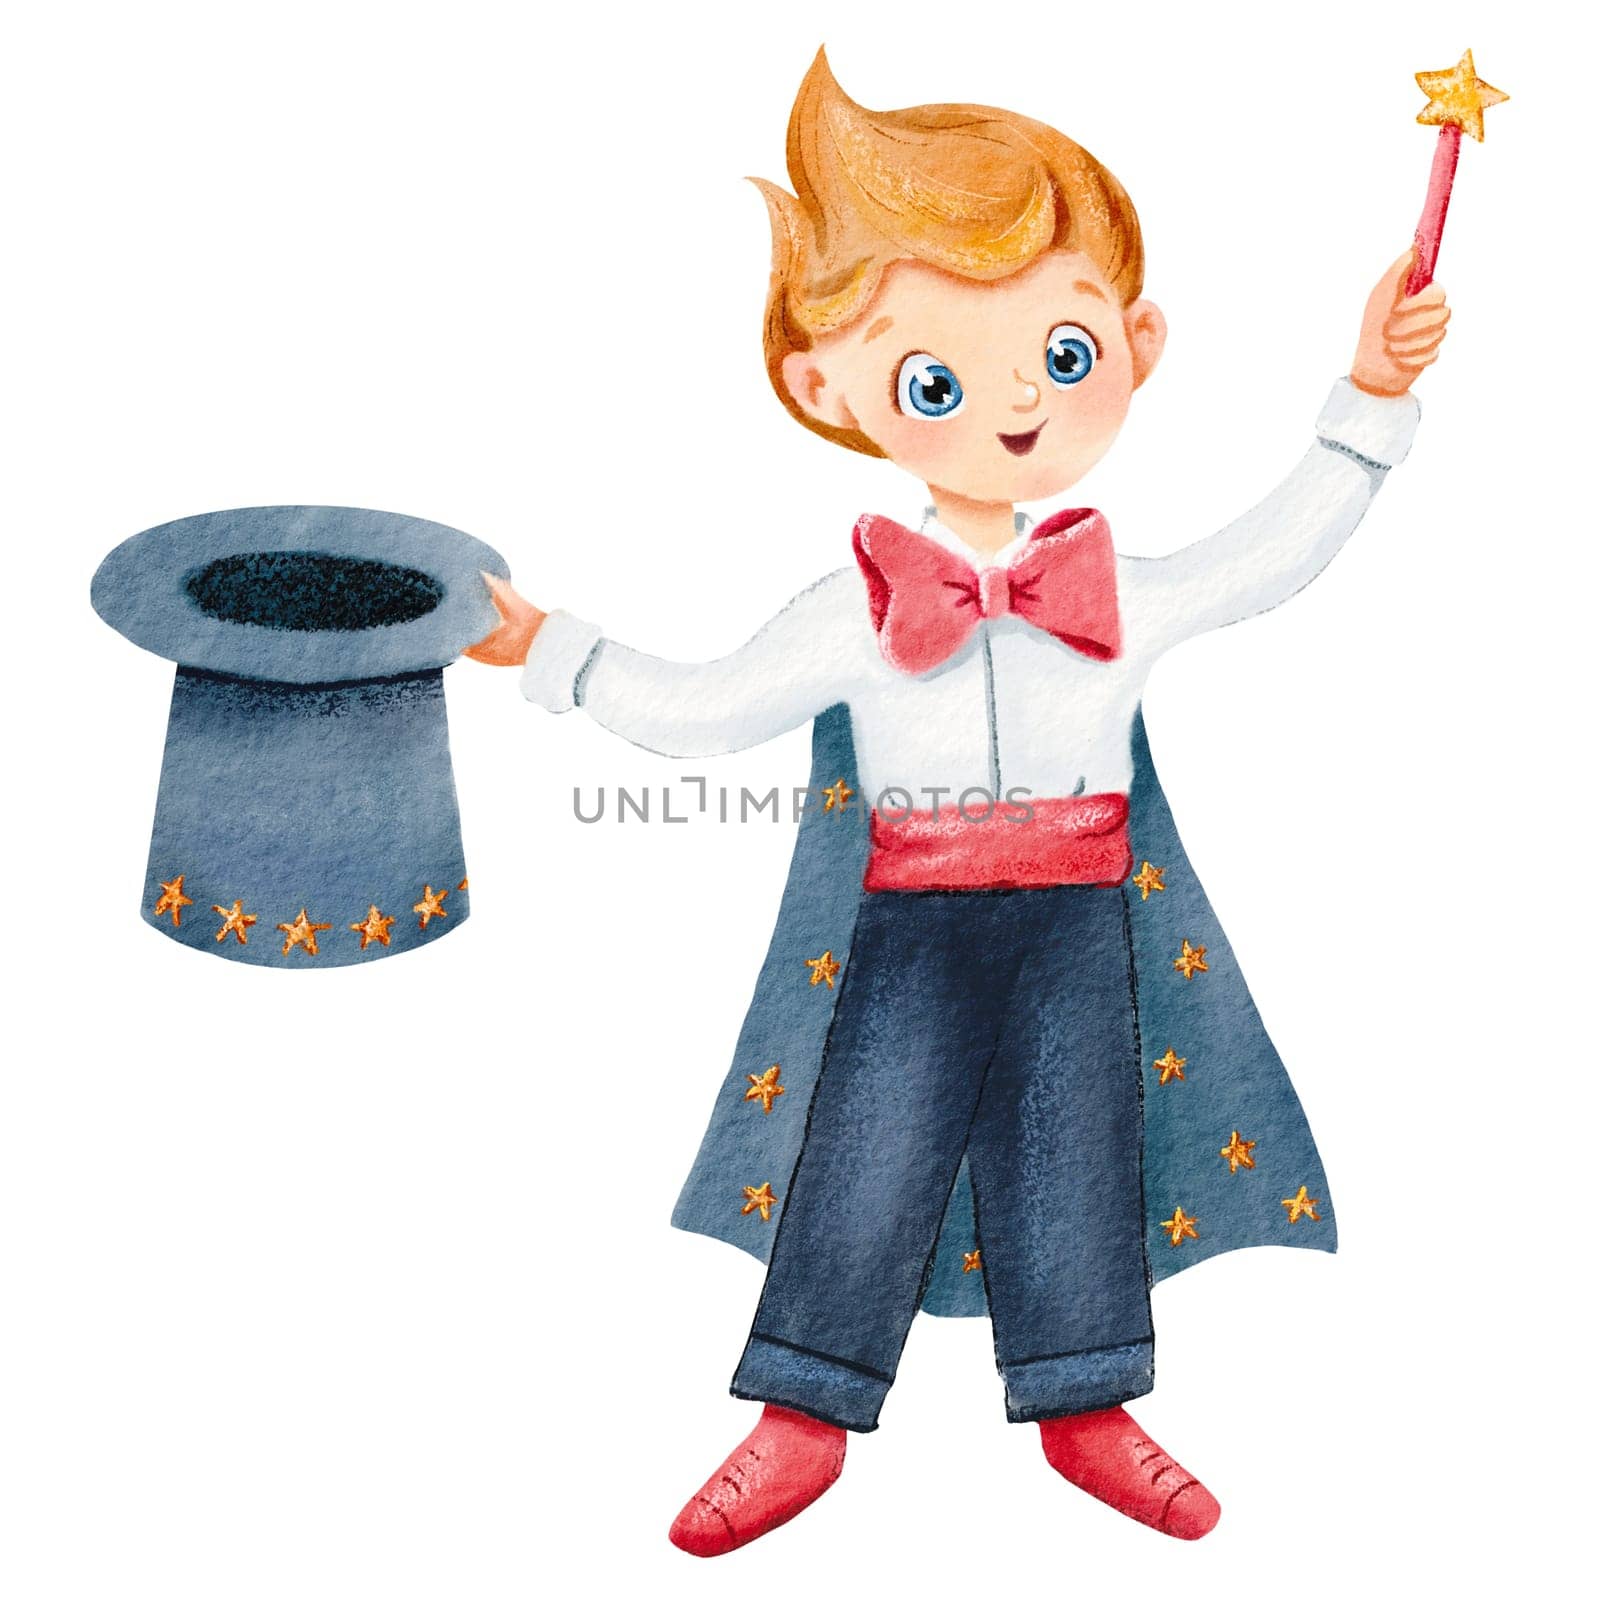 Naughty little magician. Young wizard in tailcoat, with top hat and a magic wand. Performance begins. Watercolor isolated illustration. Diversity Character for posters, postcards party invitations, by Art_Mari_Ka